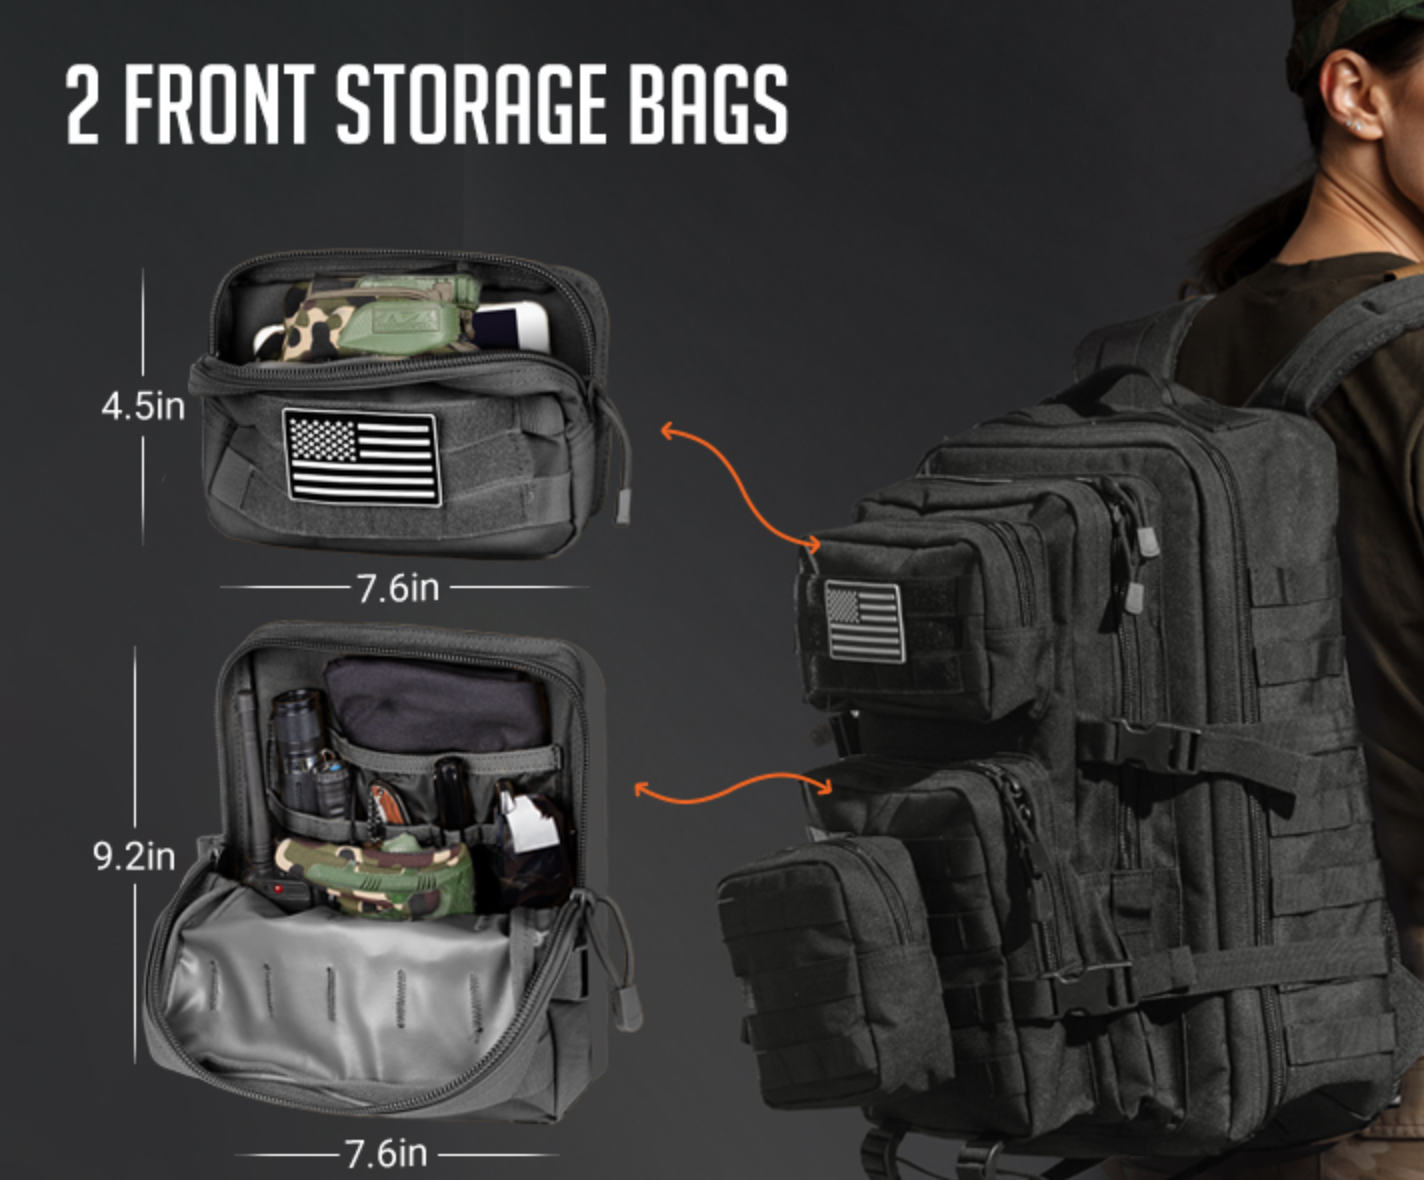 3 Day Bug-Out Backpack